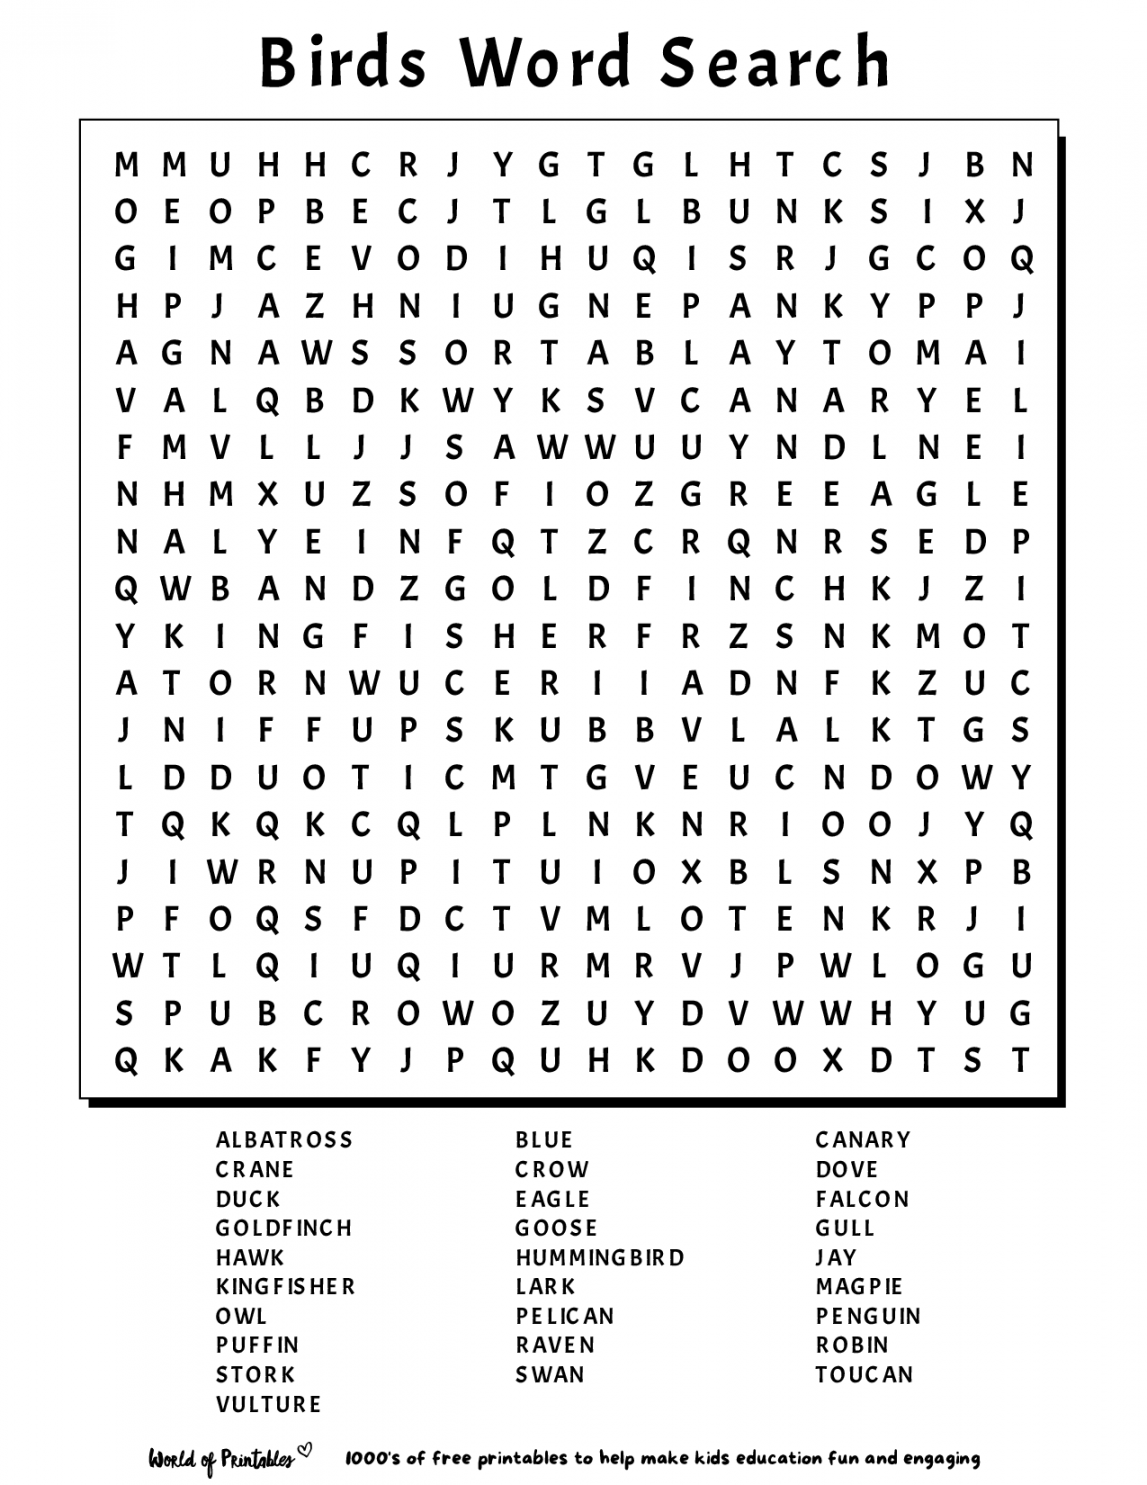 Free Printable Word Search Puzzles - Printable - Printable Word Search  World of Printables